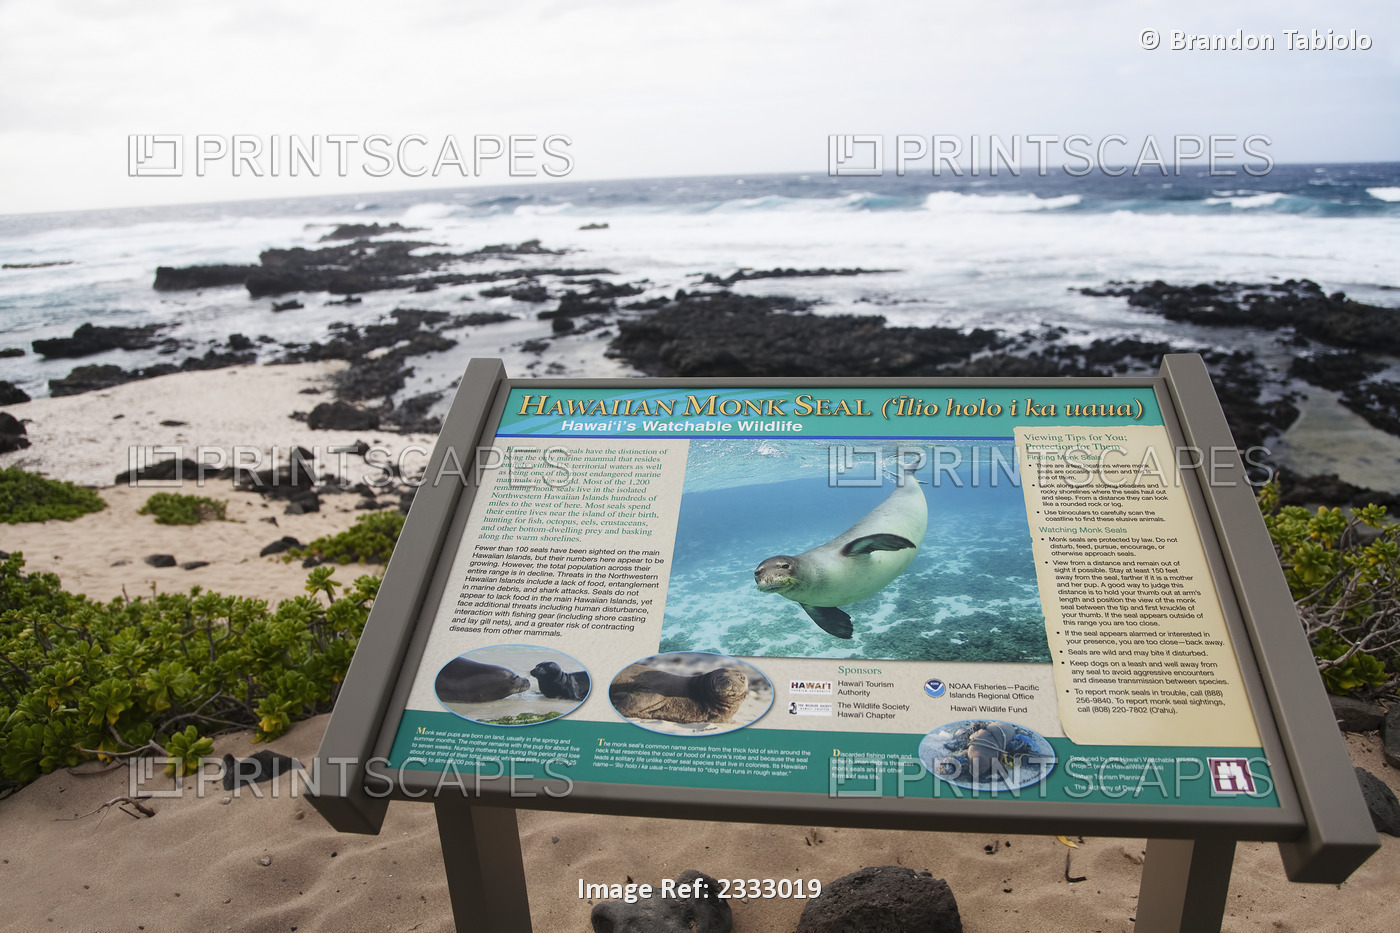 An informational sign to teach about the nearby hawaiian monk seals; Honolulu ...